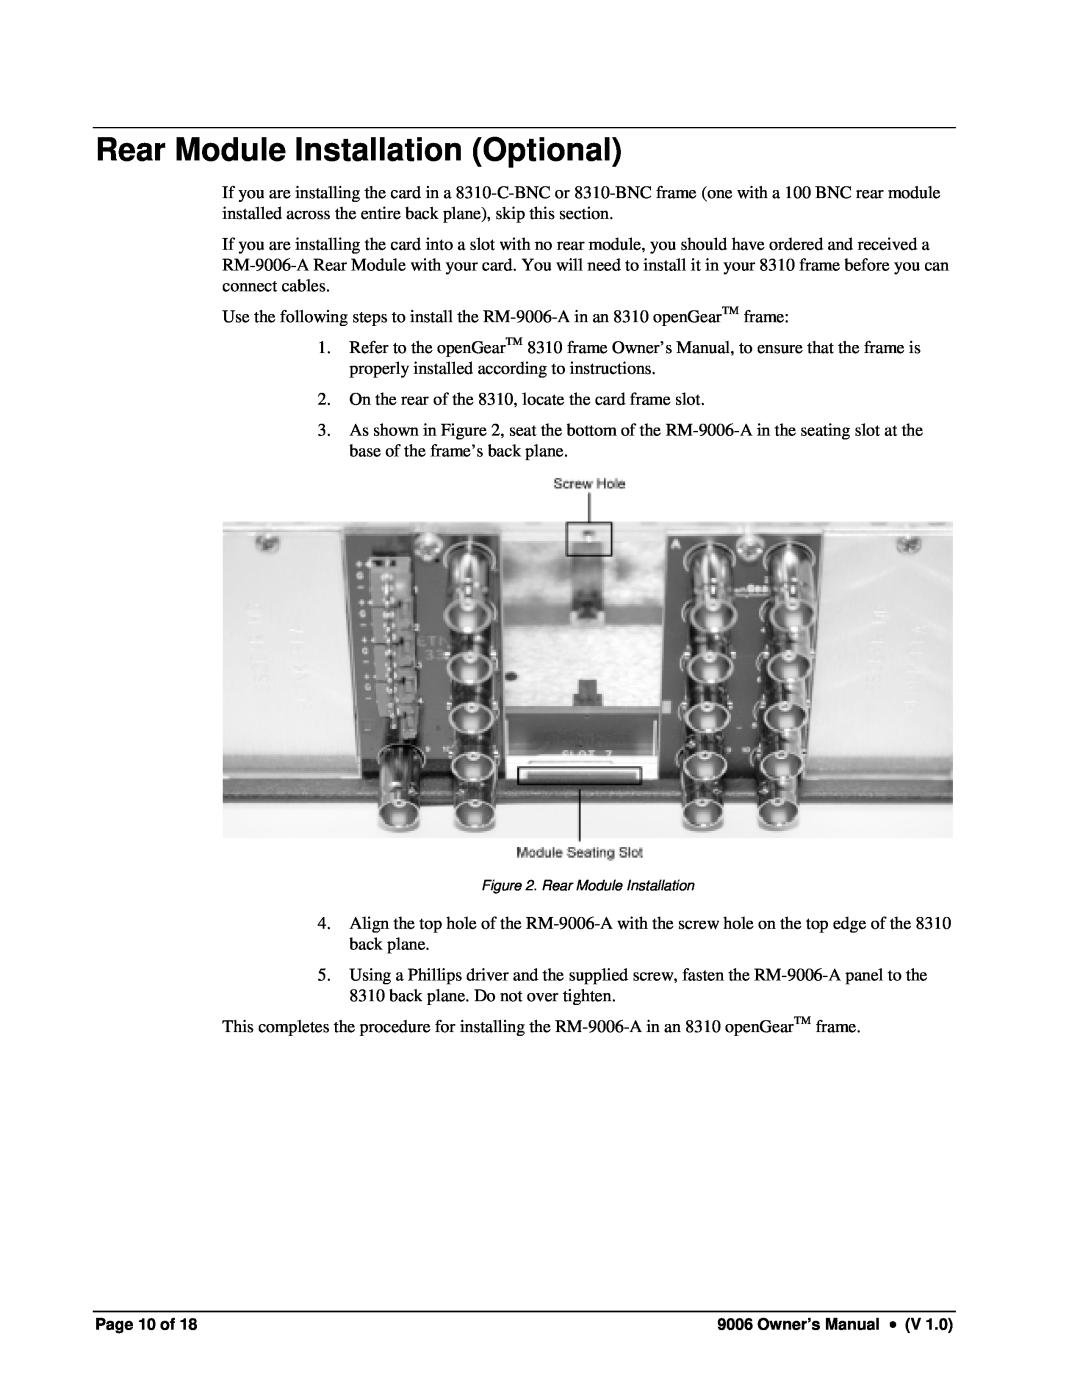 Cobalt Networks 9006 owner manual Rear Module Installation Optional, Page 10 of 